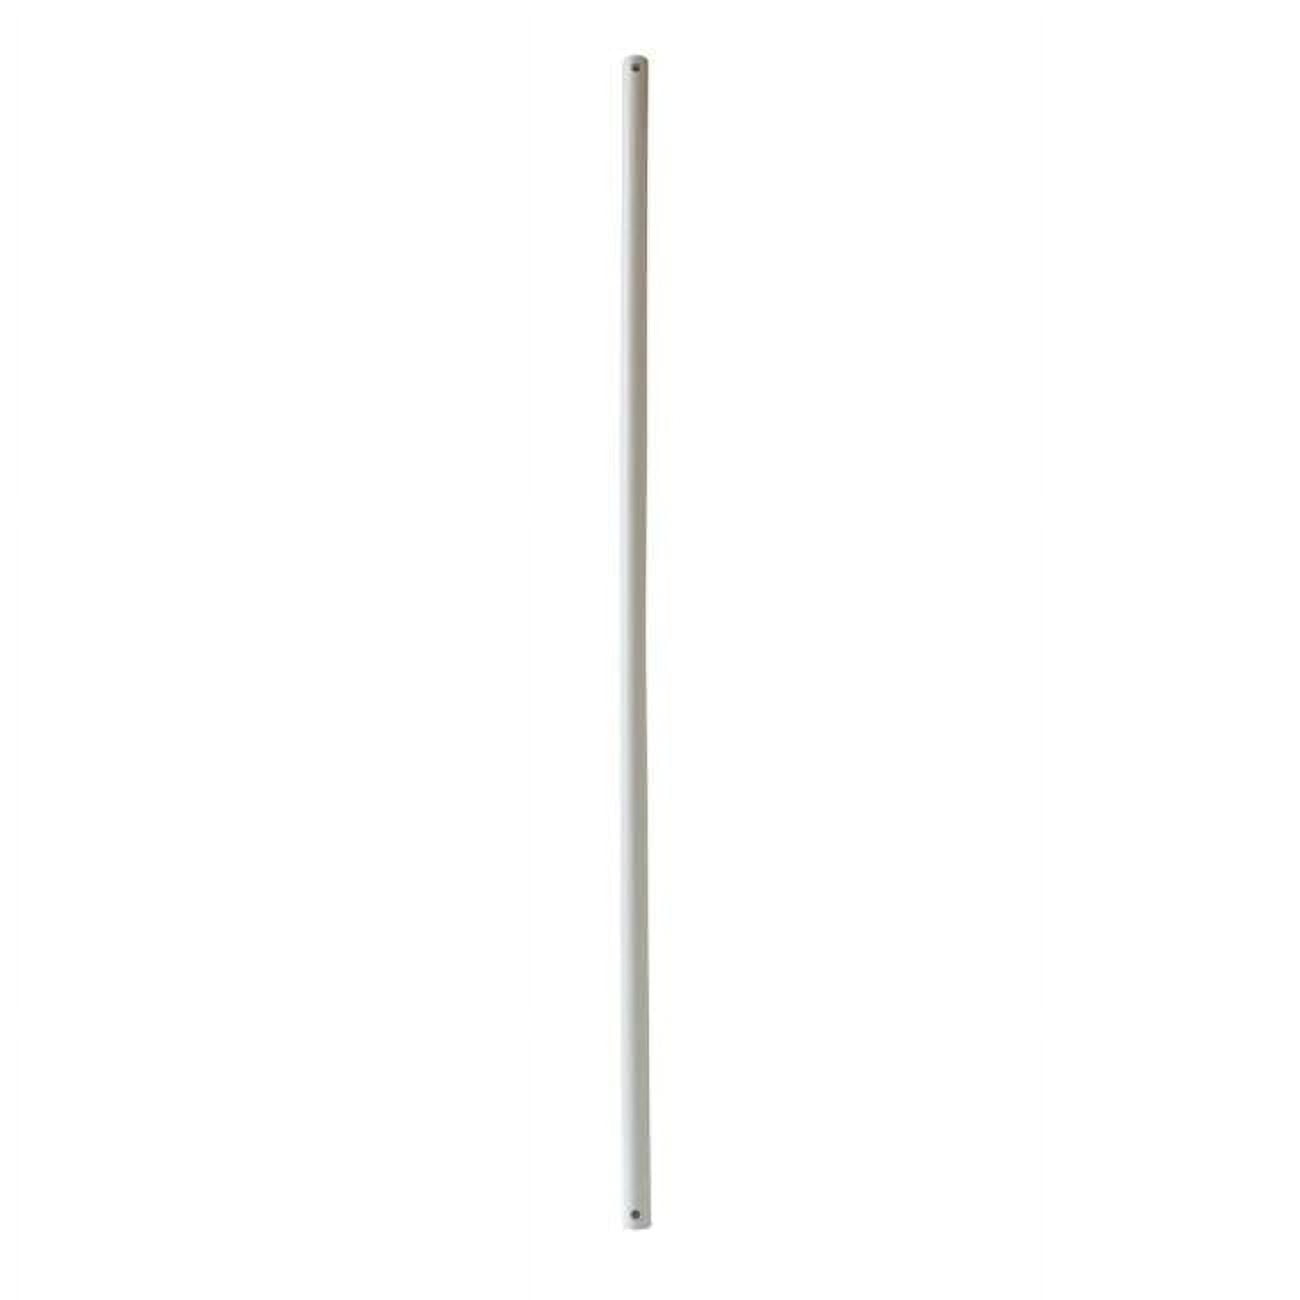 Picture of Lucci Air 21058412 Lucci Air Antique White 12in. Downrod